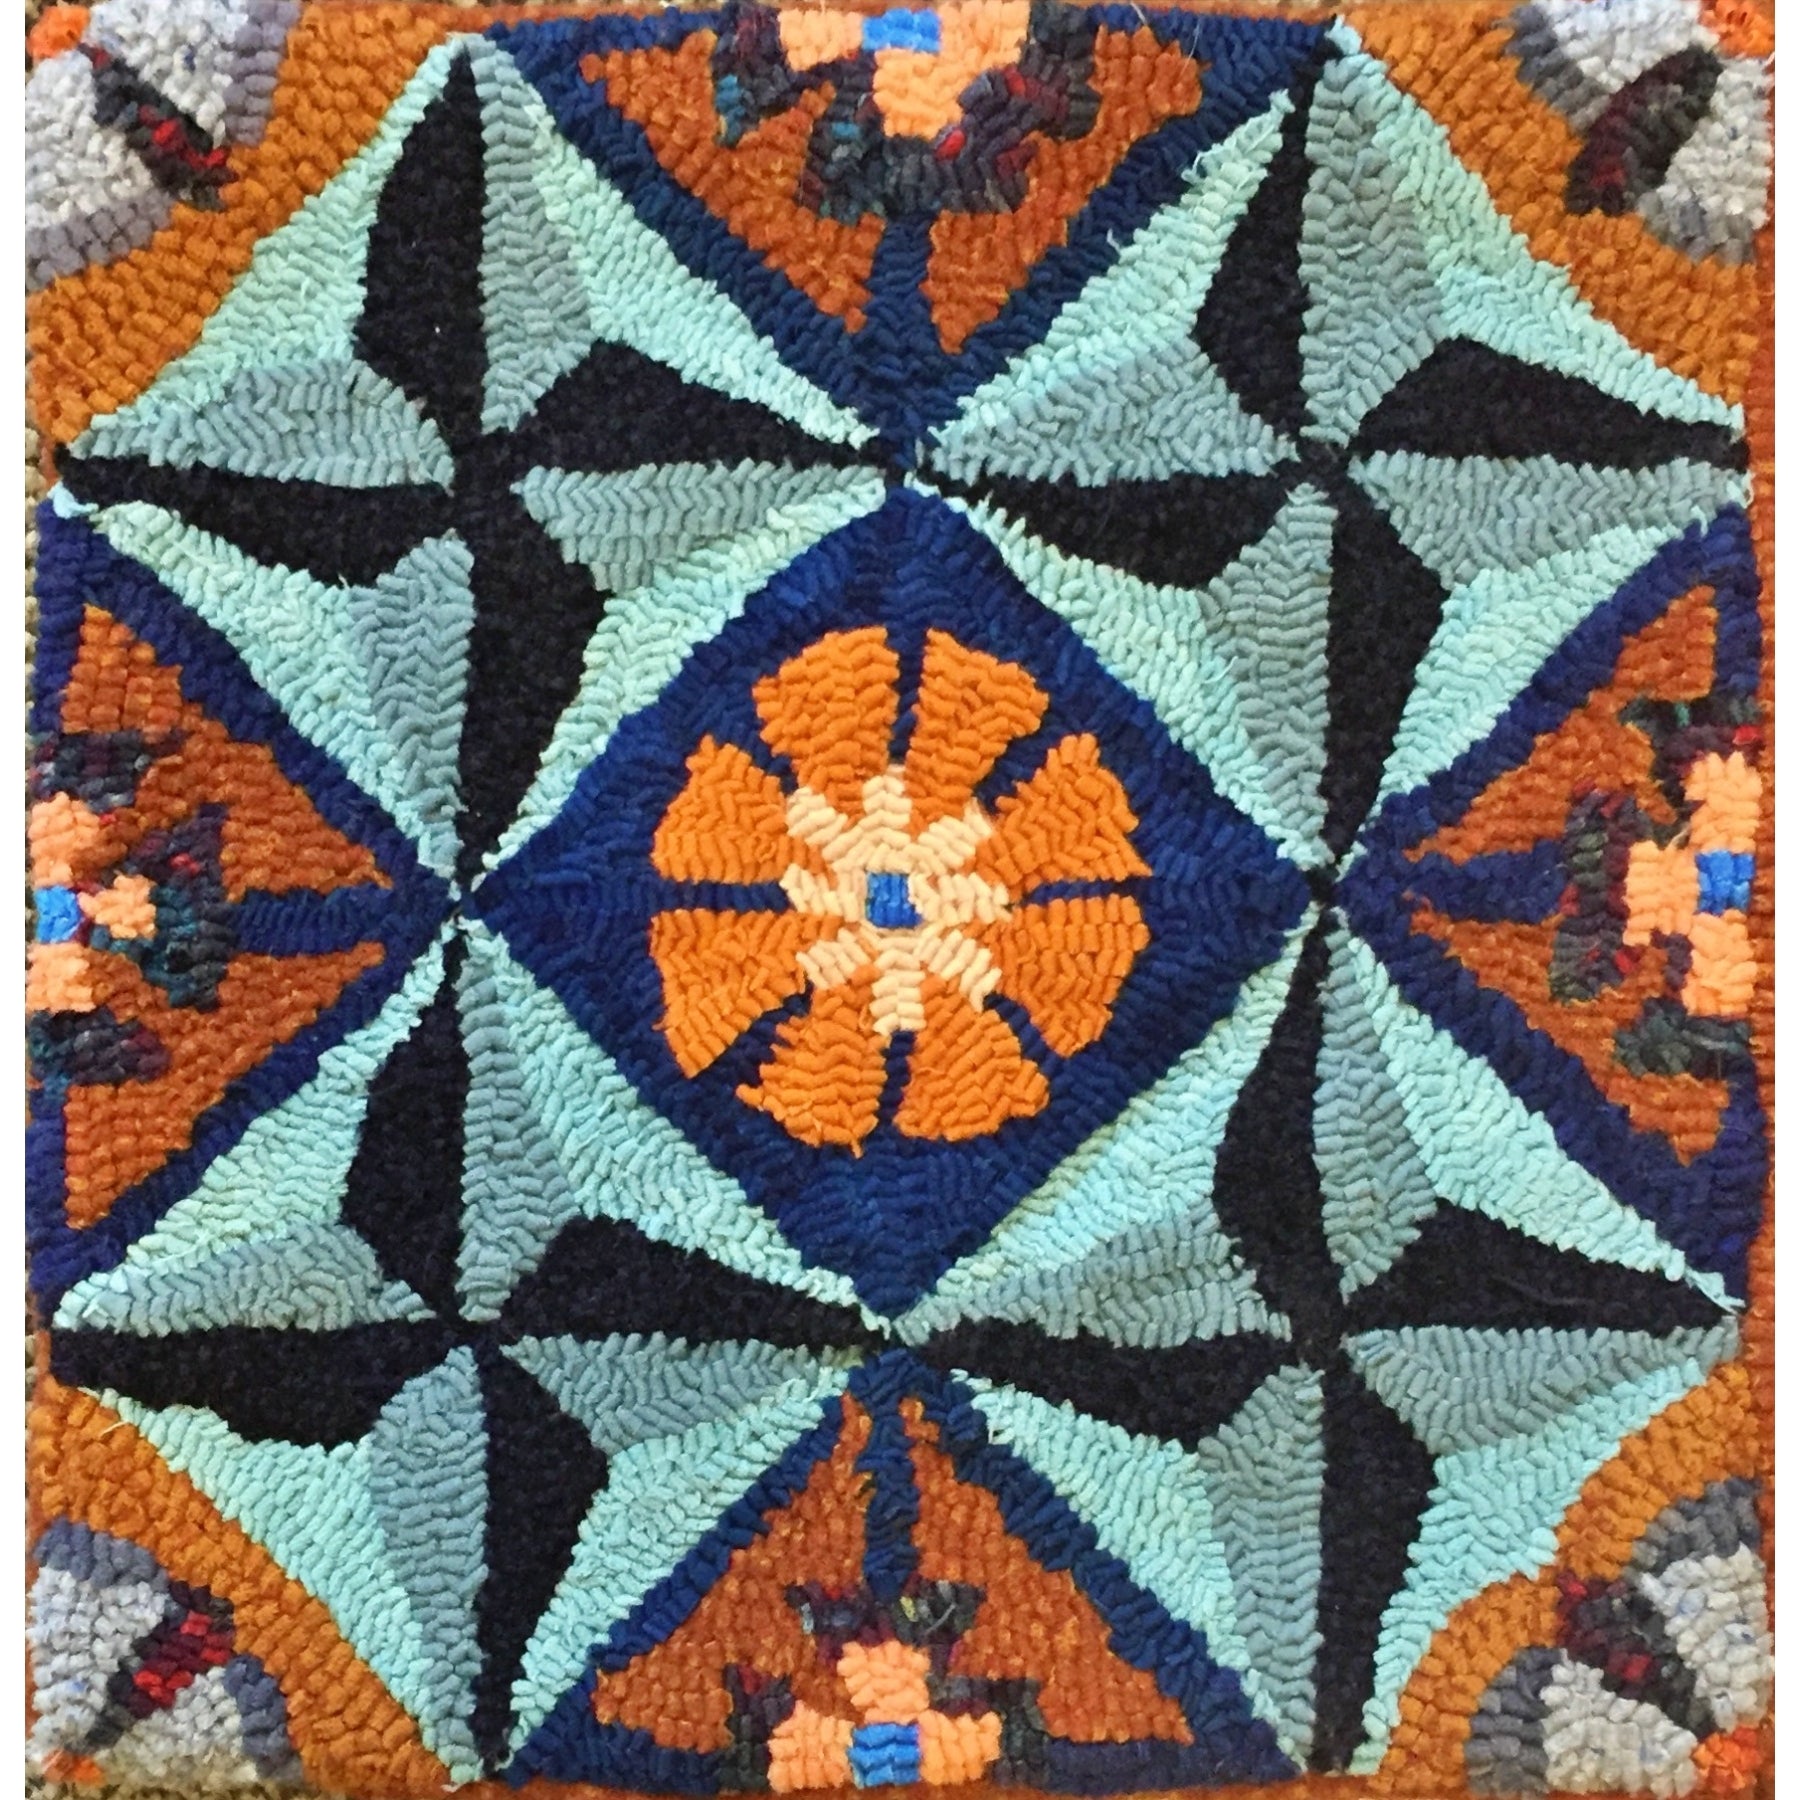 Tic Tac Toe, rug hooked by Vicki Rudolph